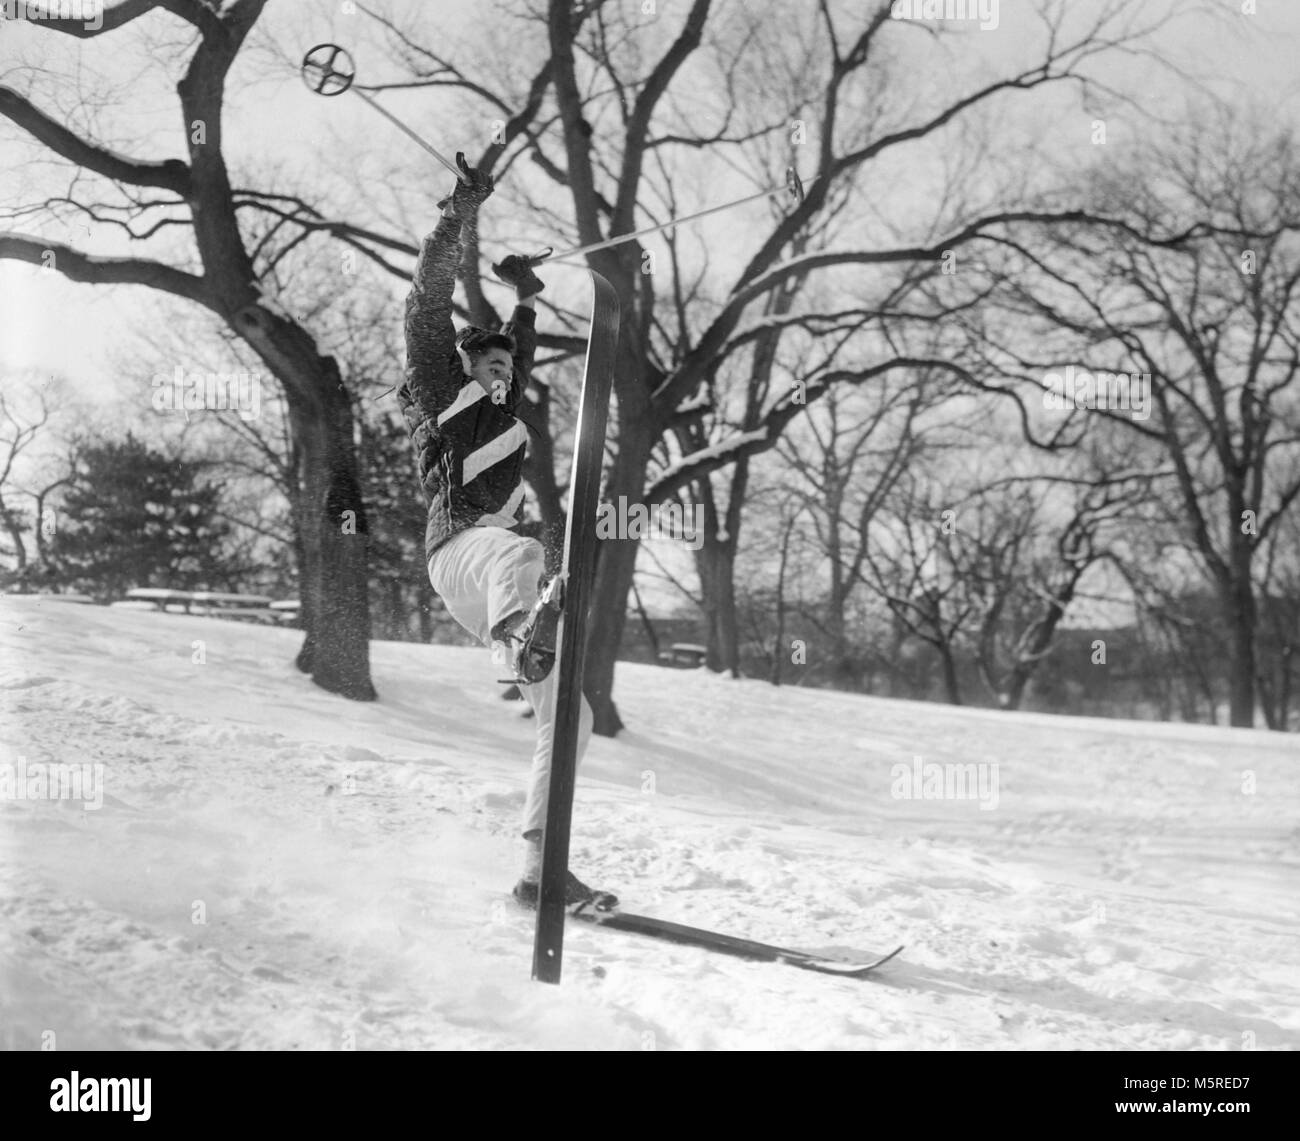 A man loses control on his skis and is headed for a fall while skiing on a hill in the Chicago area, ca. 1950. Stock Photo